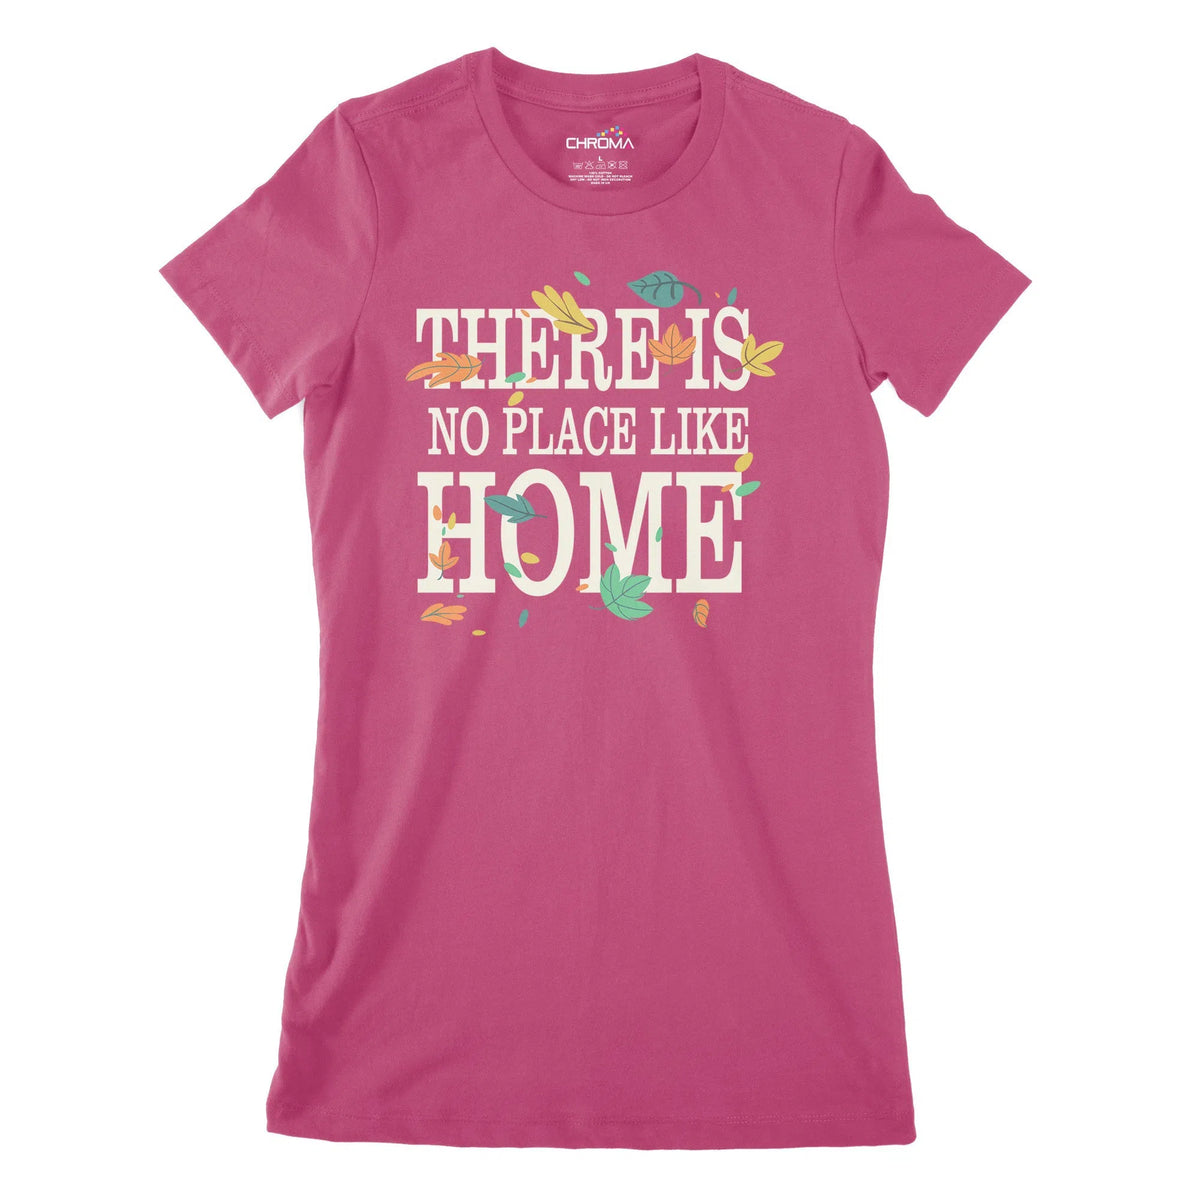 No Place Like Home Women's Classic Fitted T-Shirt Chroma Clothing